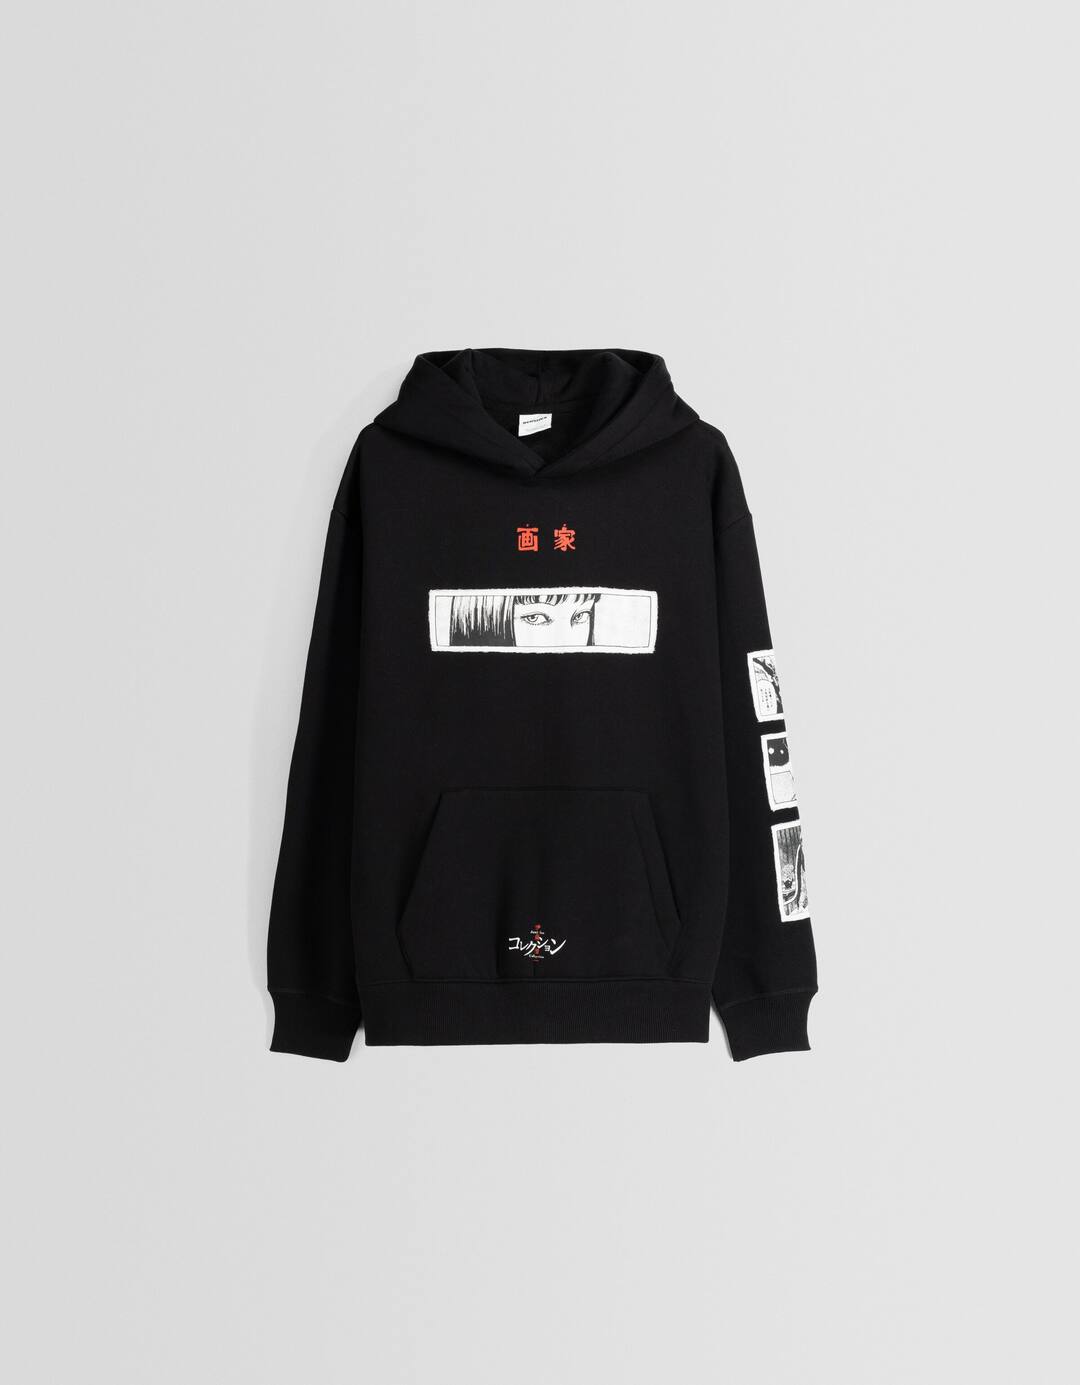 Junji Ito Collection hoodie with patches